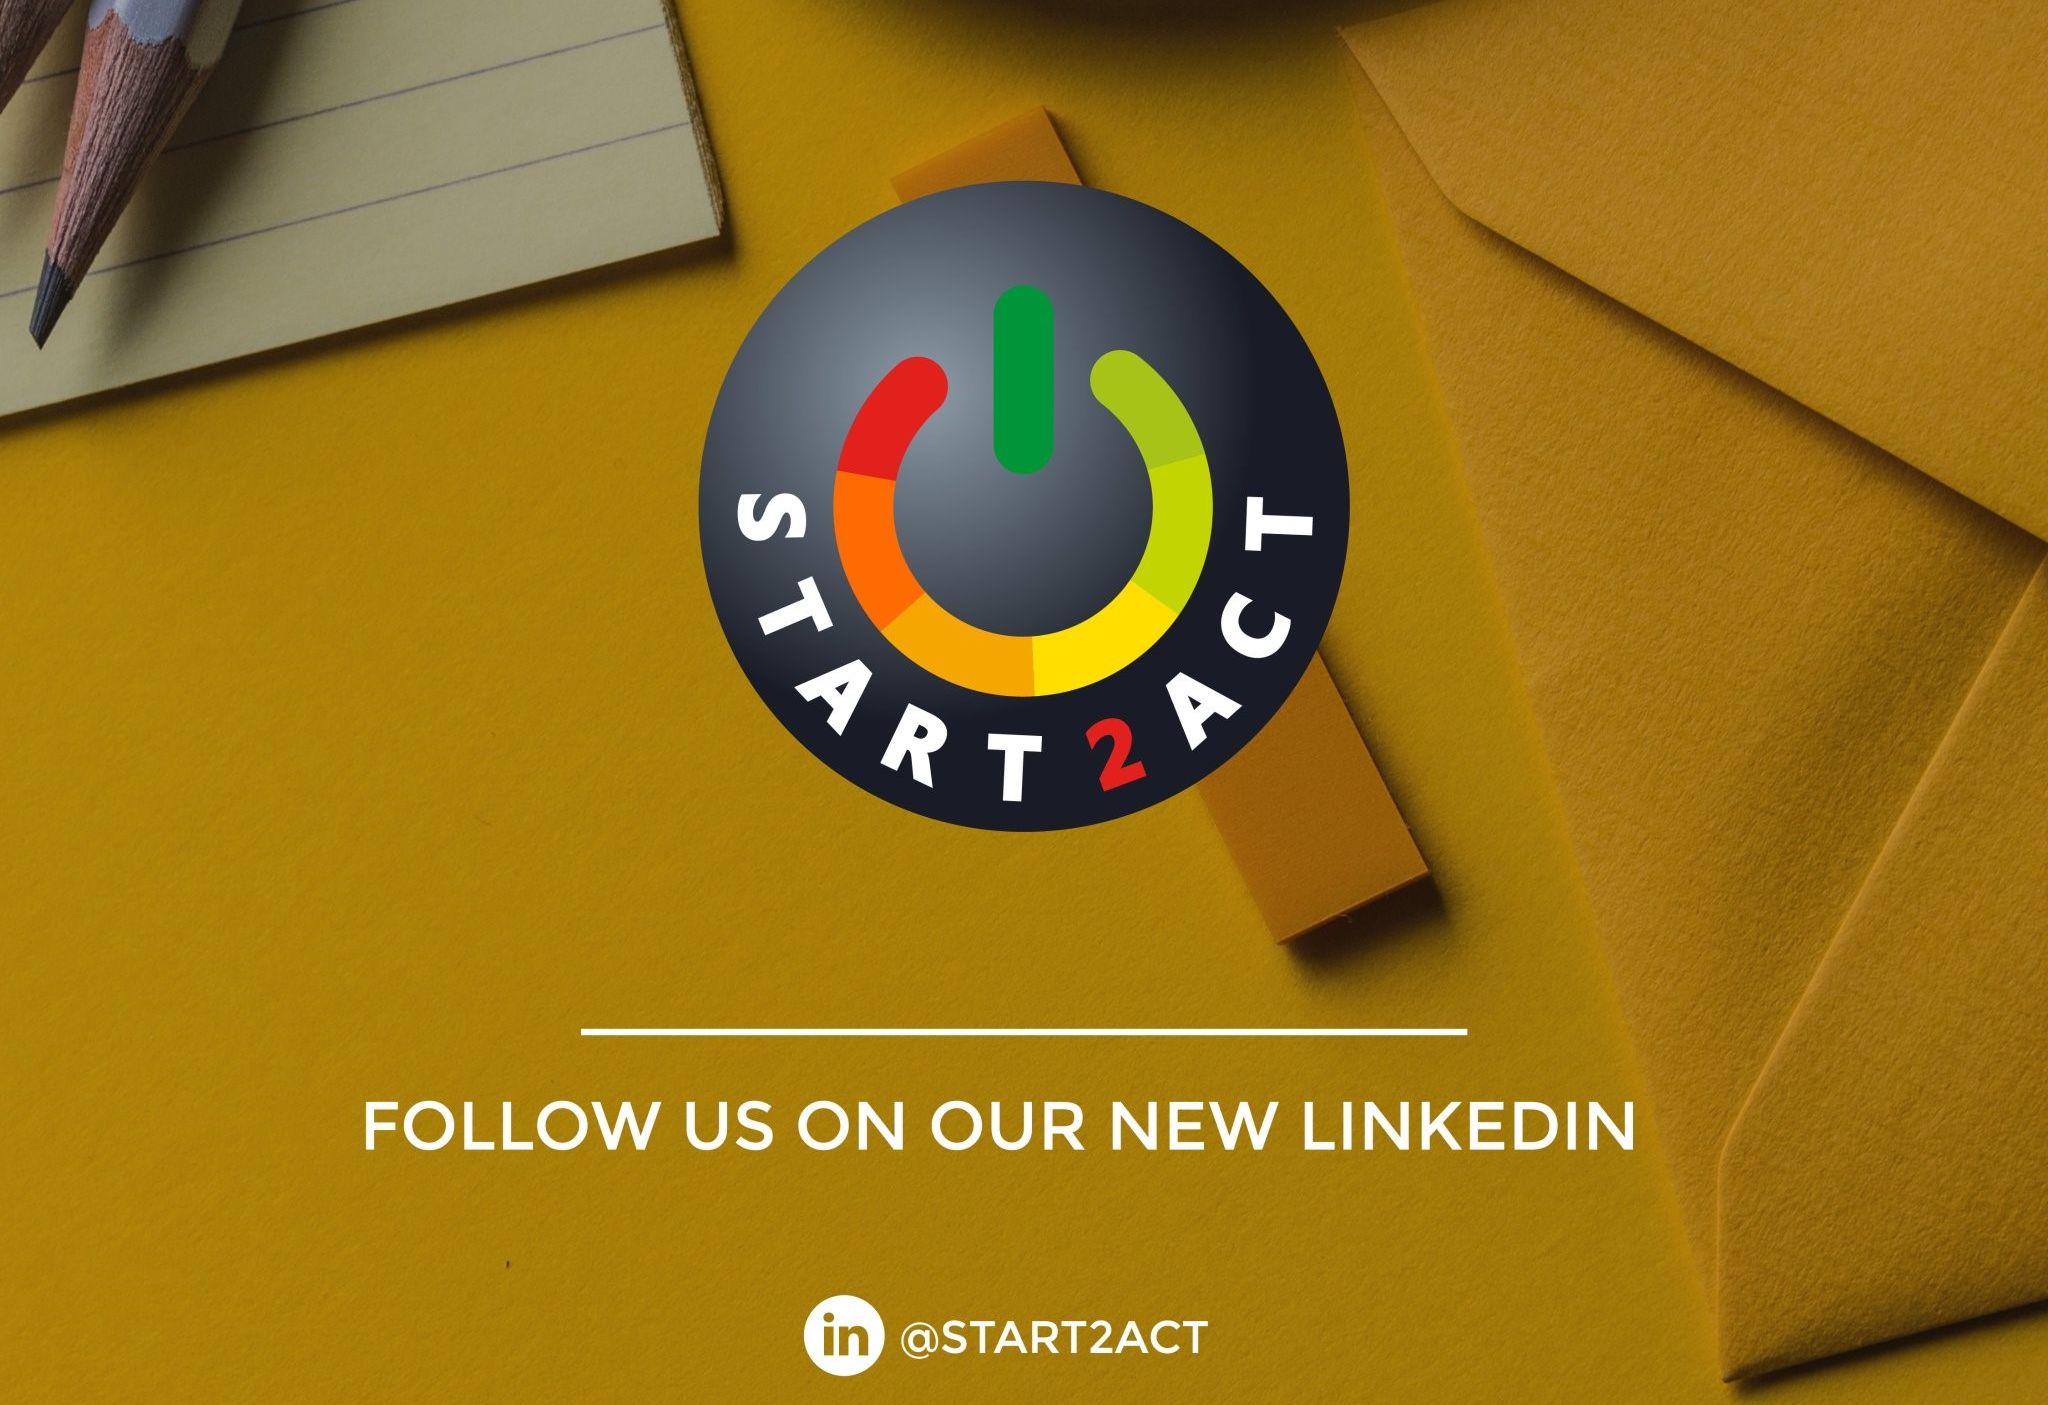 START2ACT is now on LinkedIn for better professional networking!